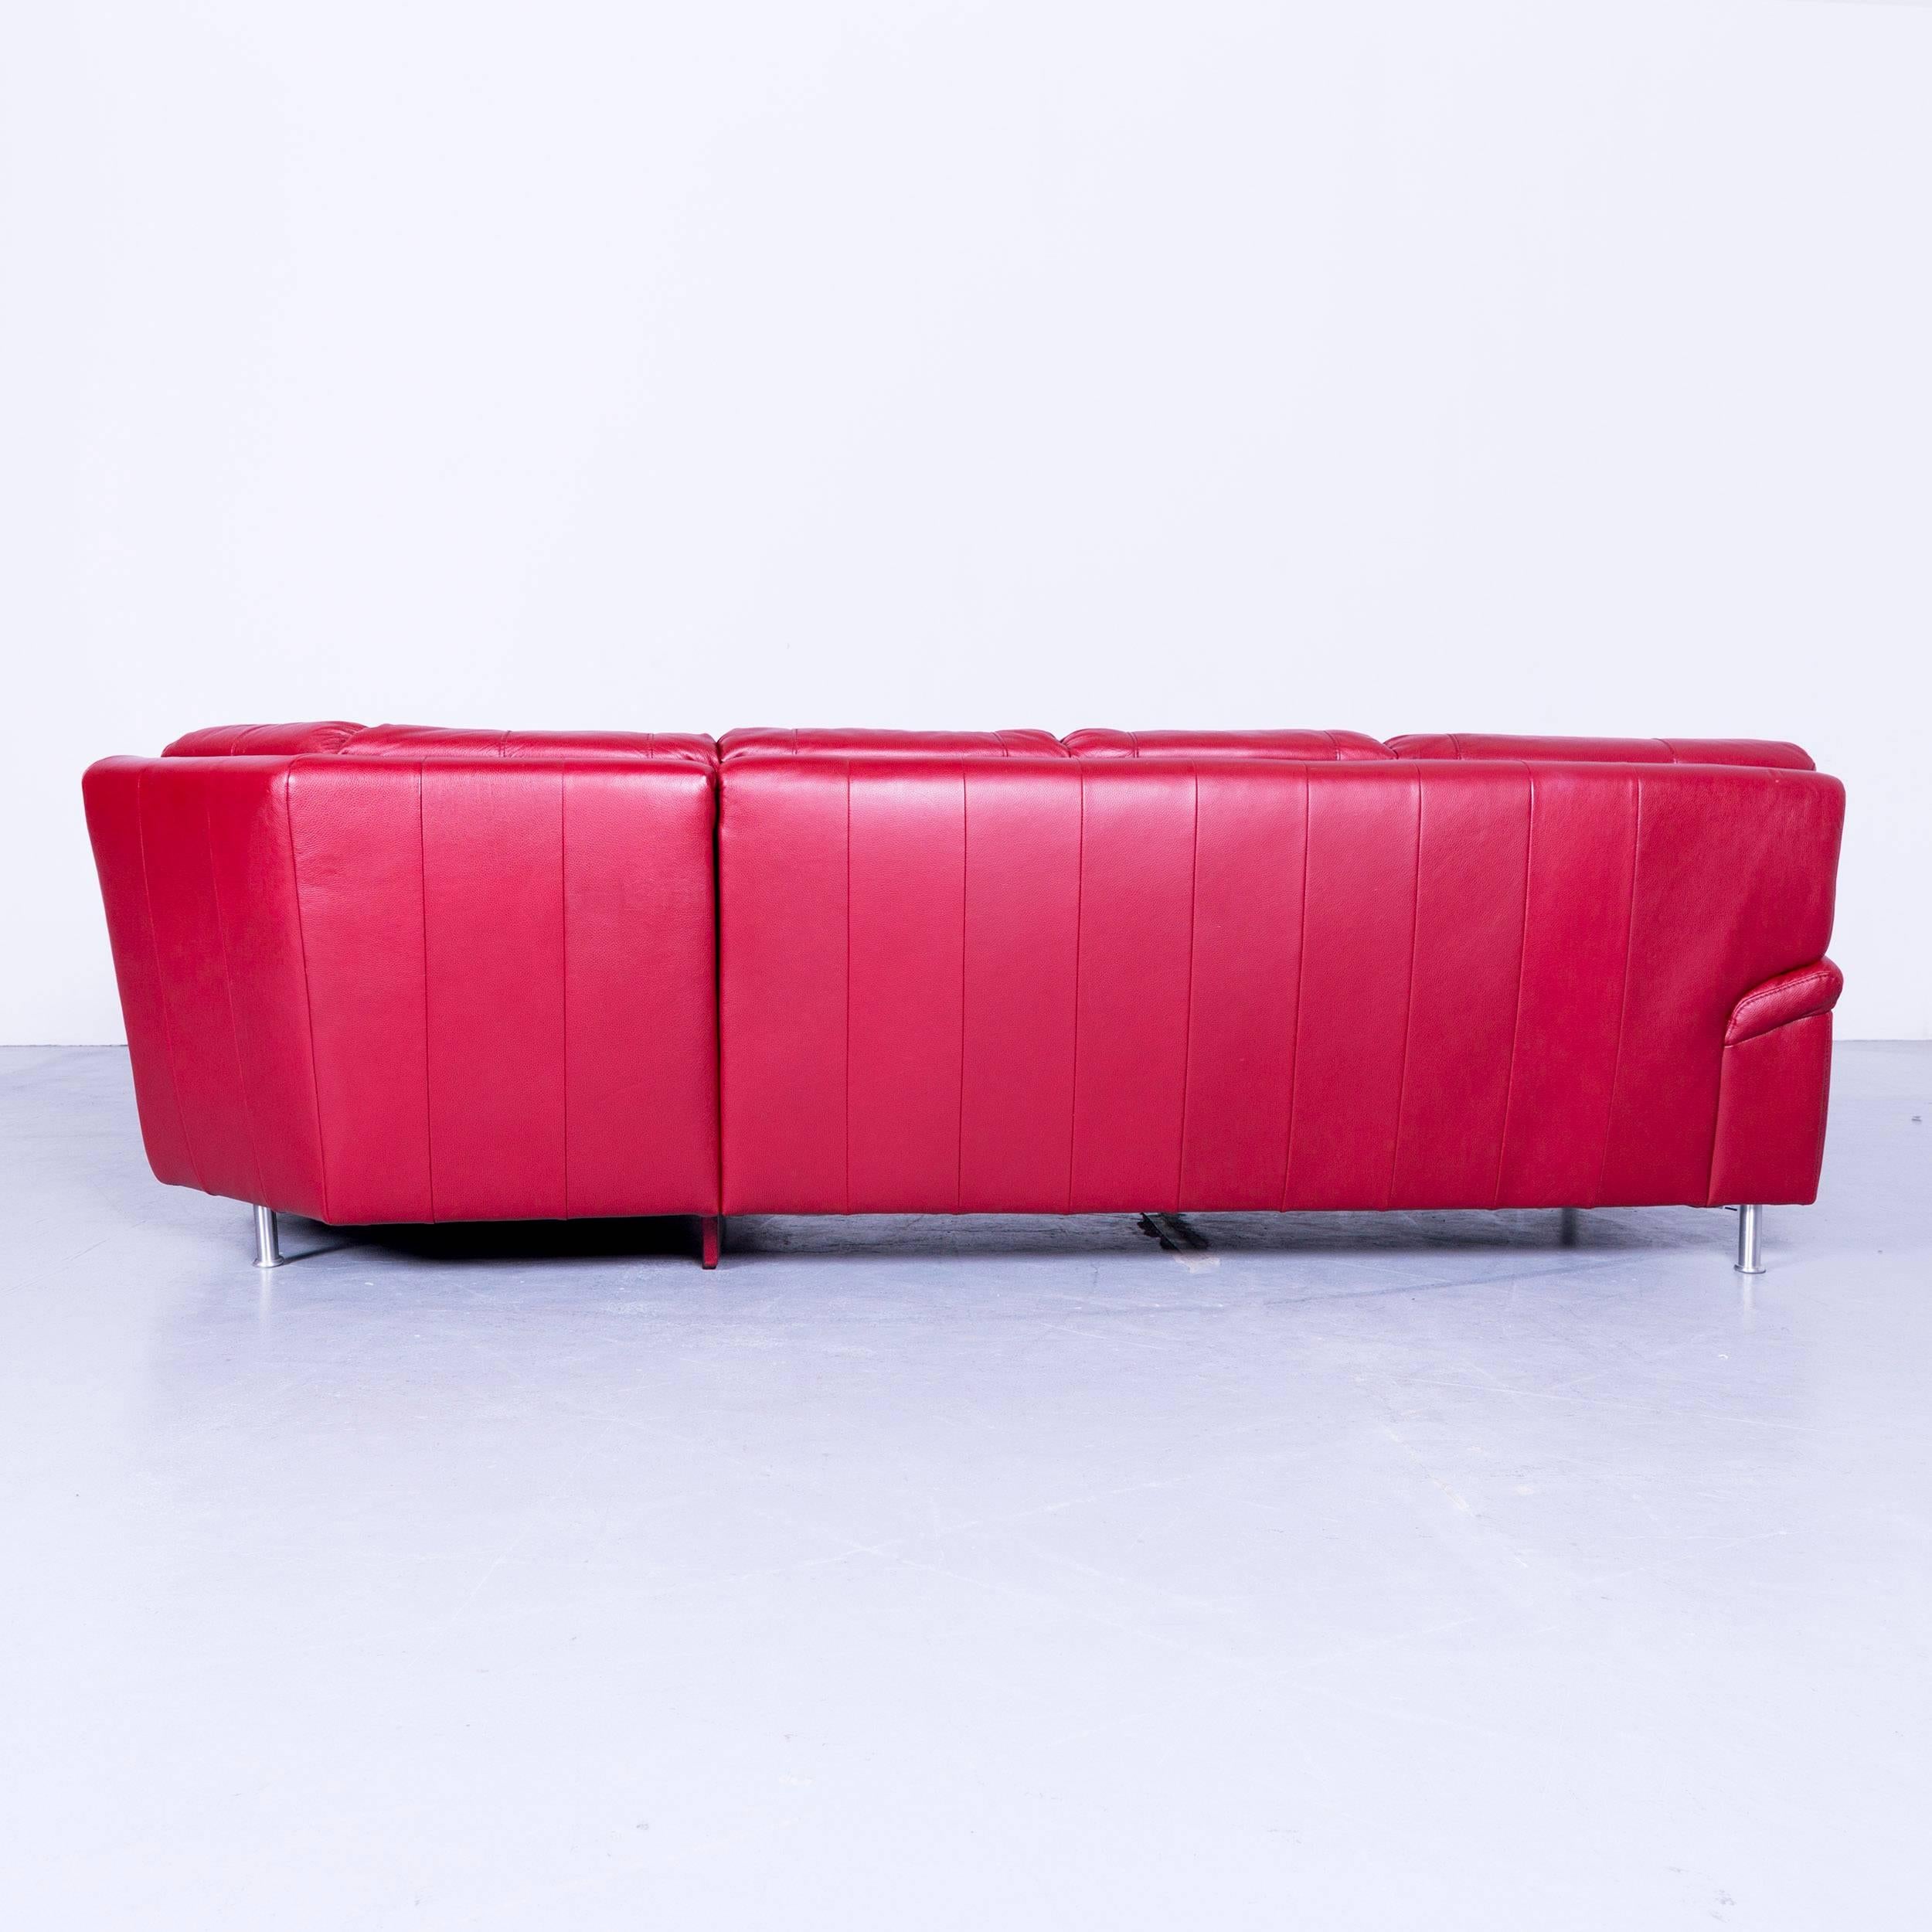 Himolla Corner Sofa Leather Red Modern Couch 3